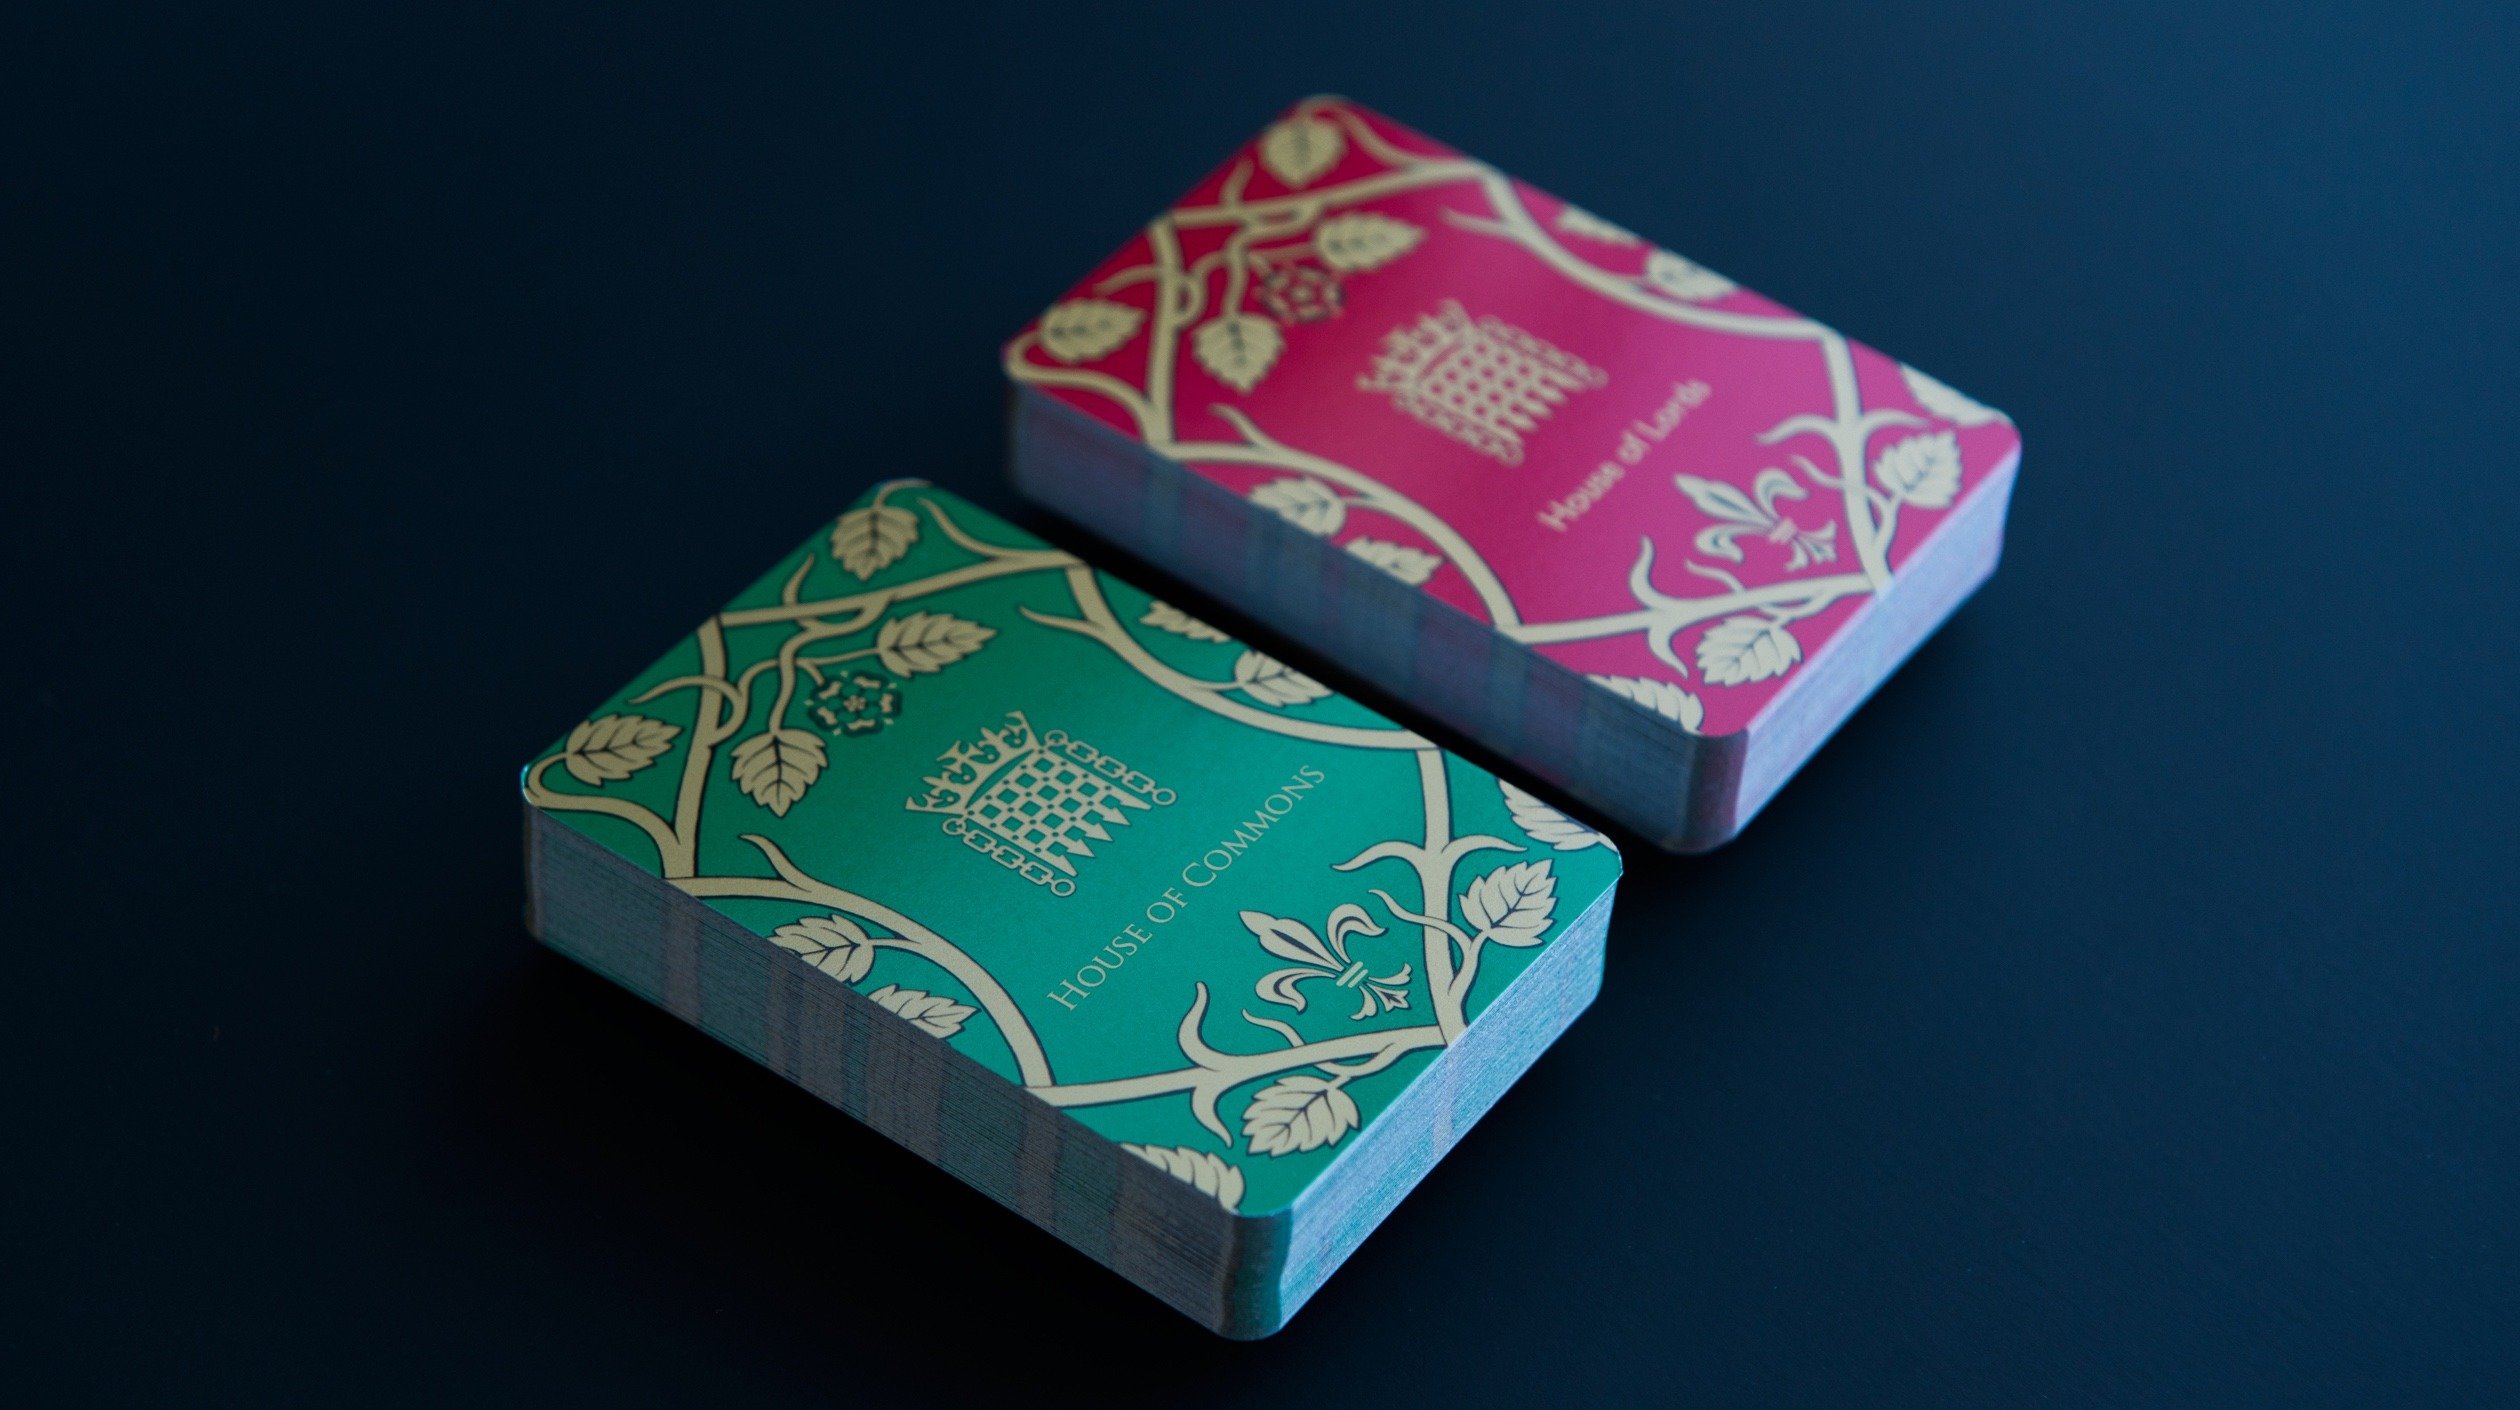 Luxury Personalised Playing Cards Hand Printed